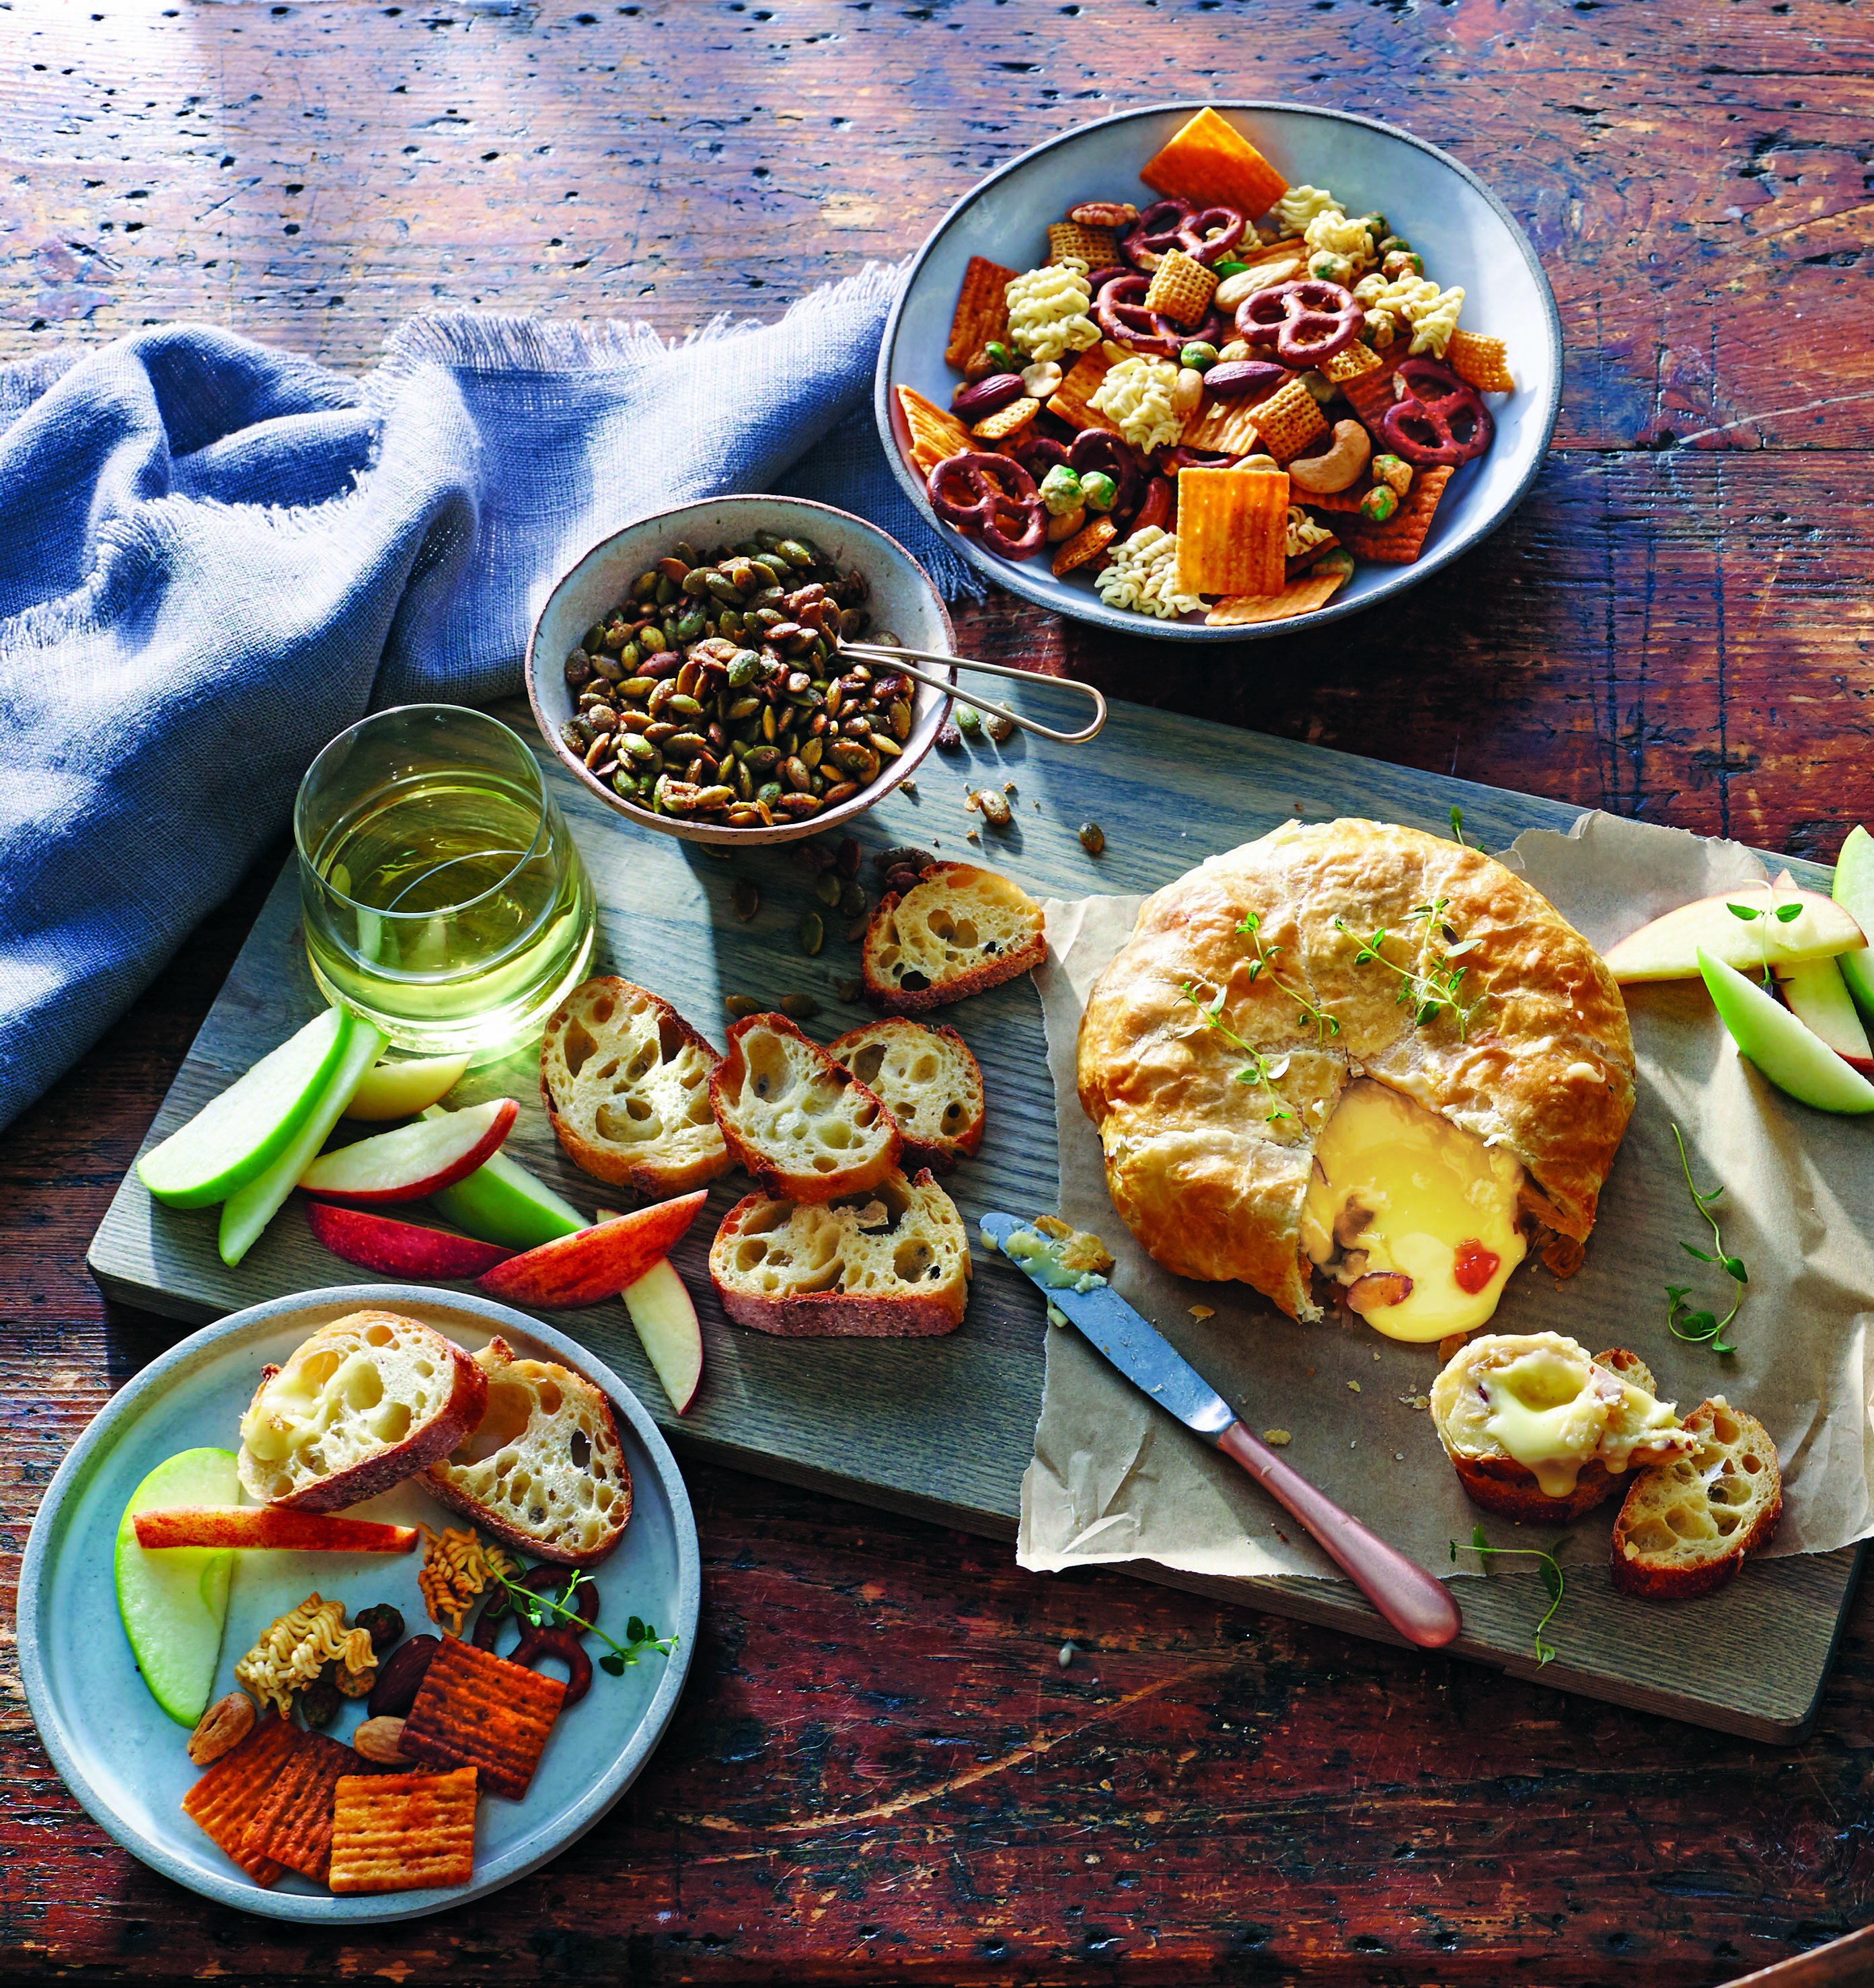 The indulgent and comforting buttery goodness of baked Brie is only elevated by combining it with sauteed almonds and a tangy-sweet mango chutney.